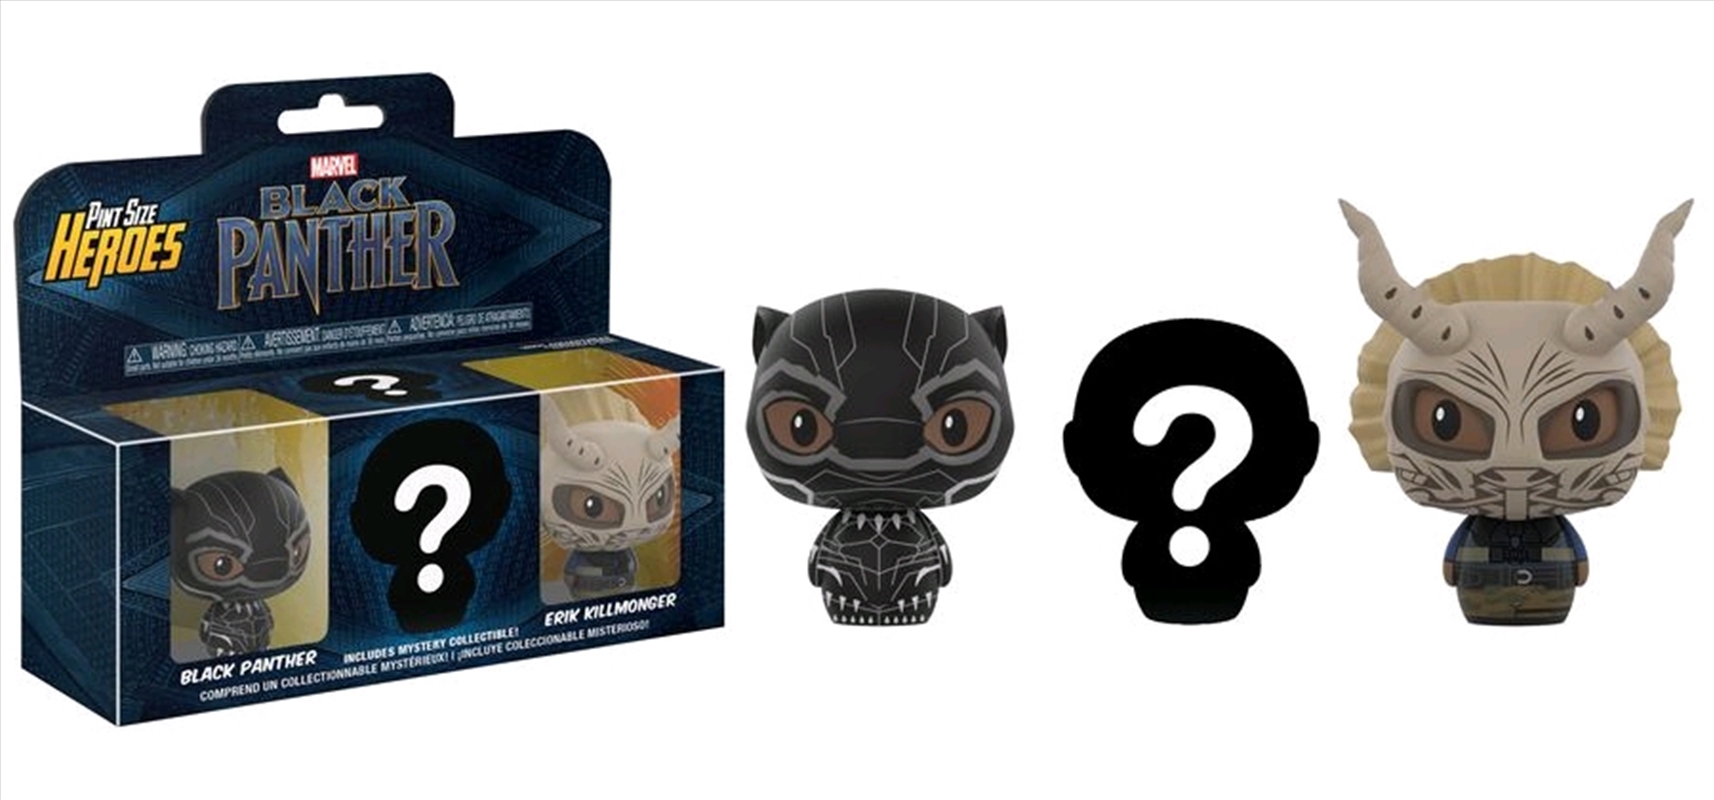 Black Panther - Pint Size Heroes 3-pack/Product Detail/Figurines